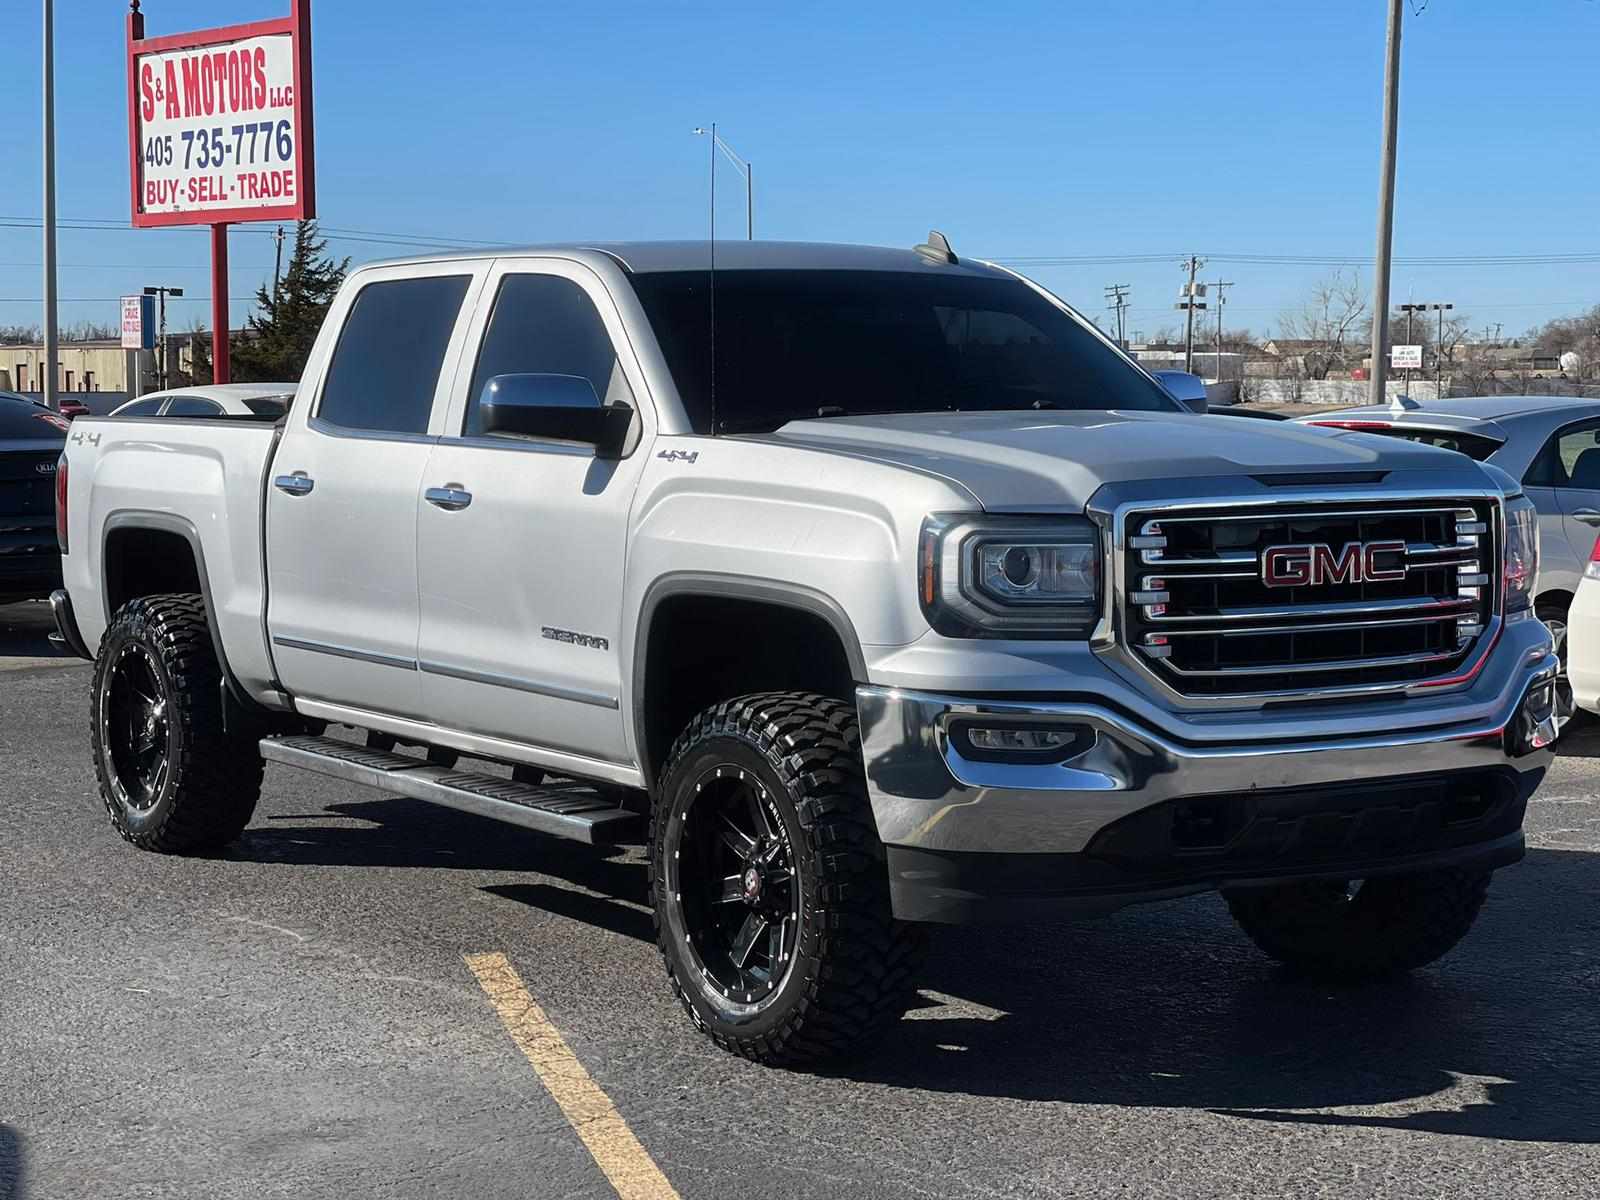 Used 2015 GMC Sierra 1500 for Sale - Used Cars for Sale in Moore, OK | S&A  MOTORS